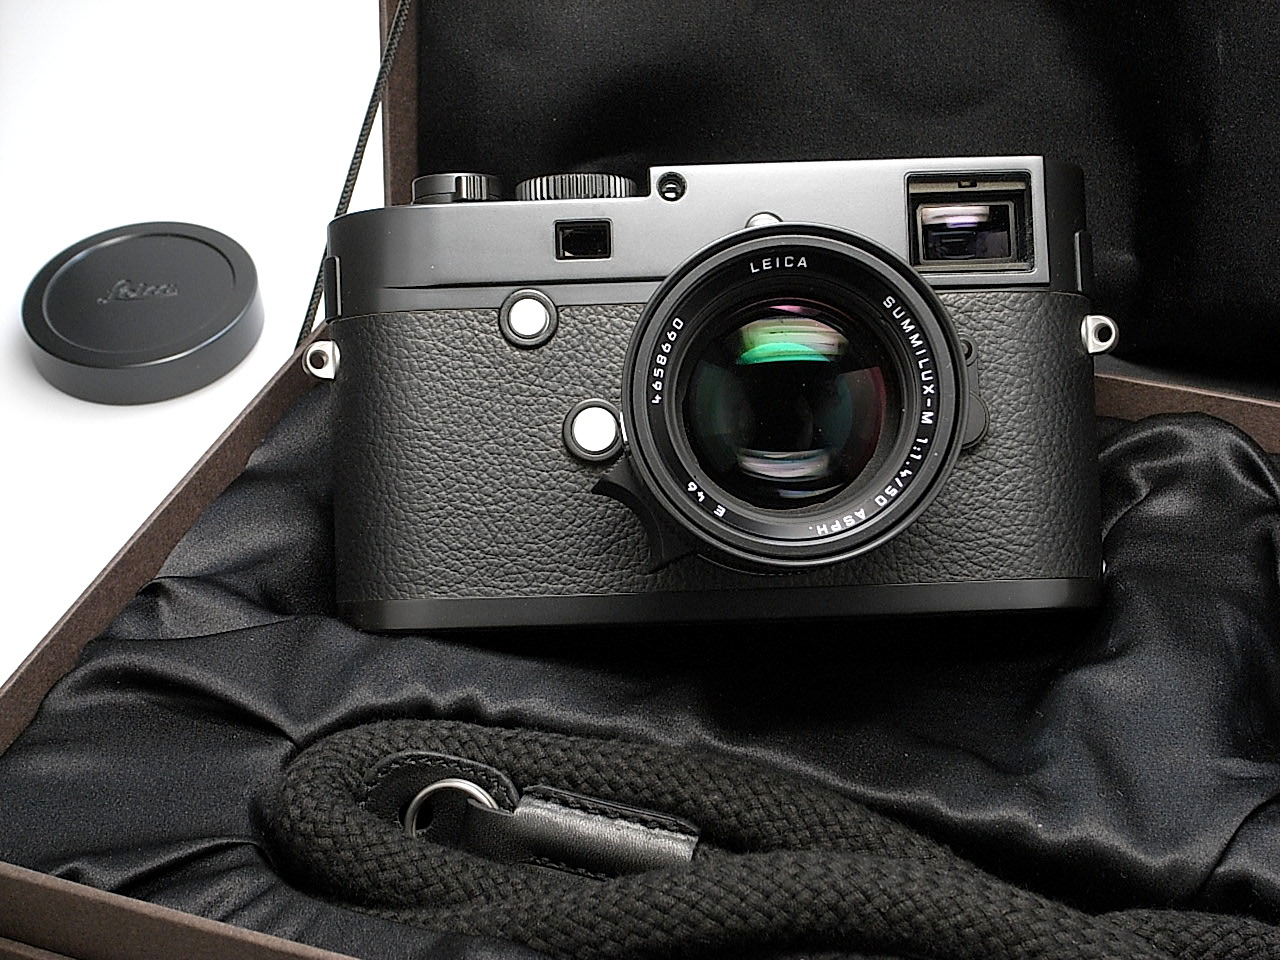 Leica Monochrom “Blue Stain” limited edition camera - Leica Rumors